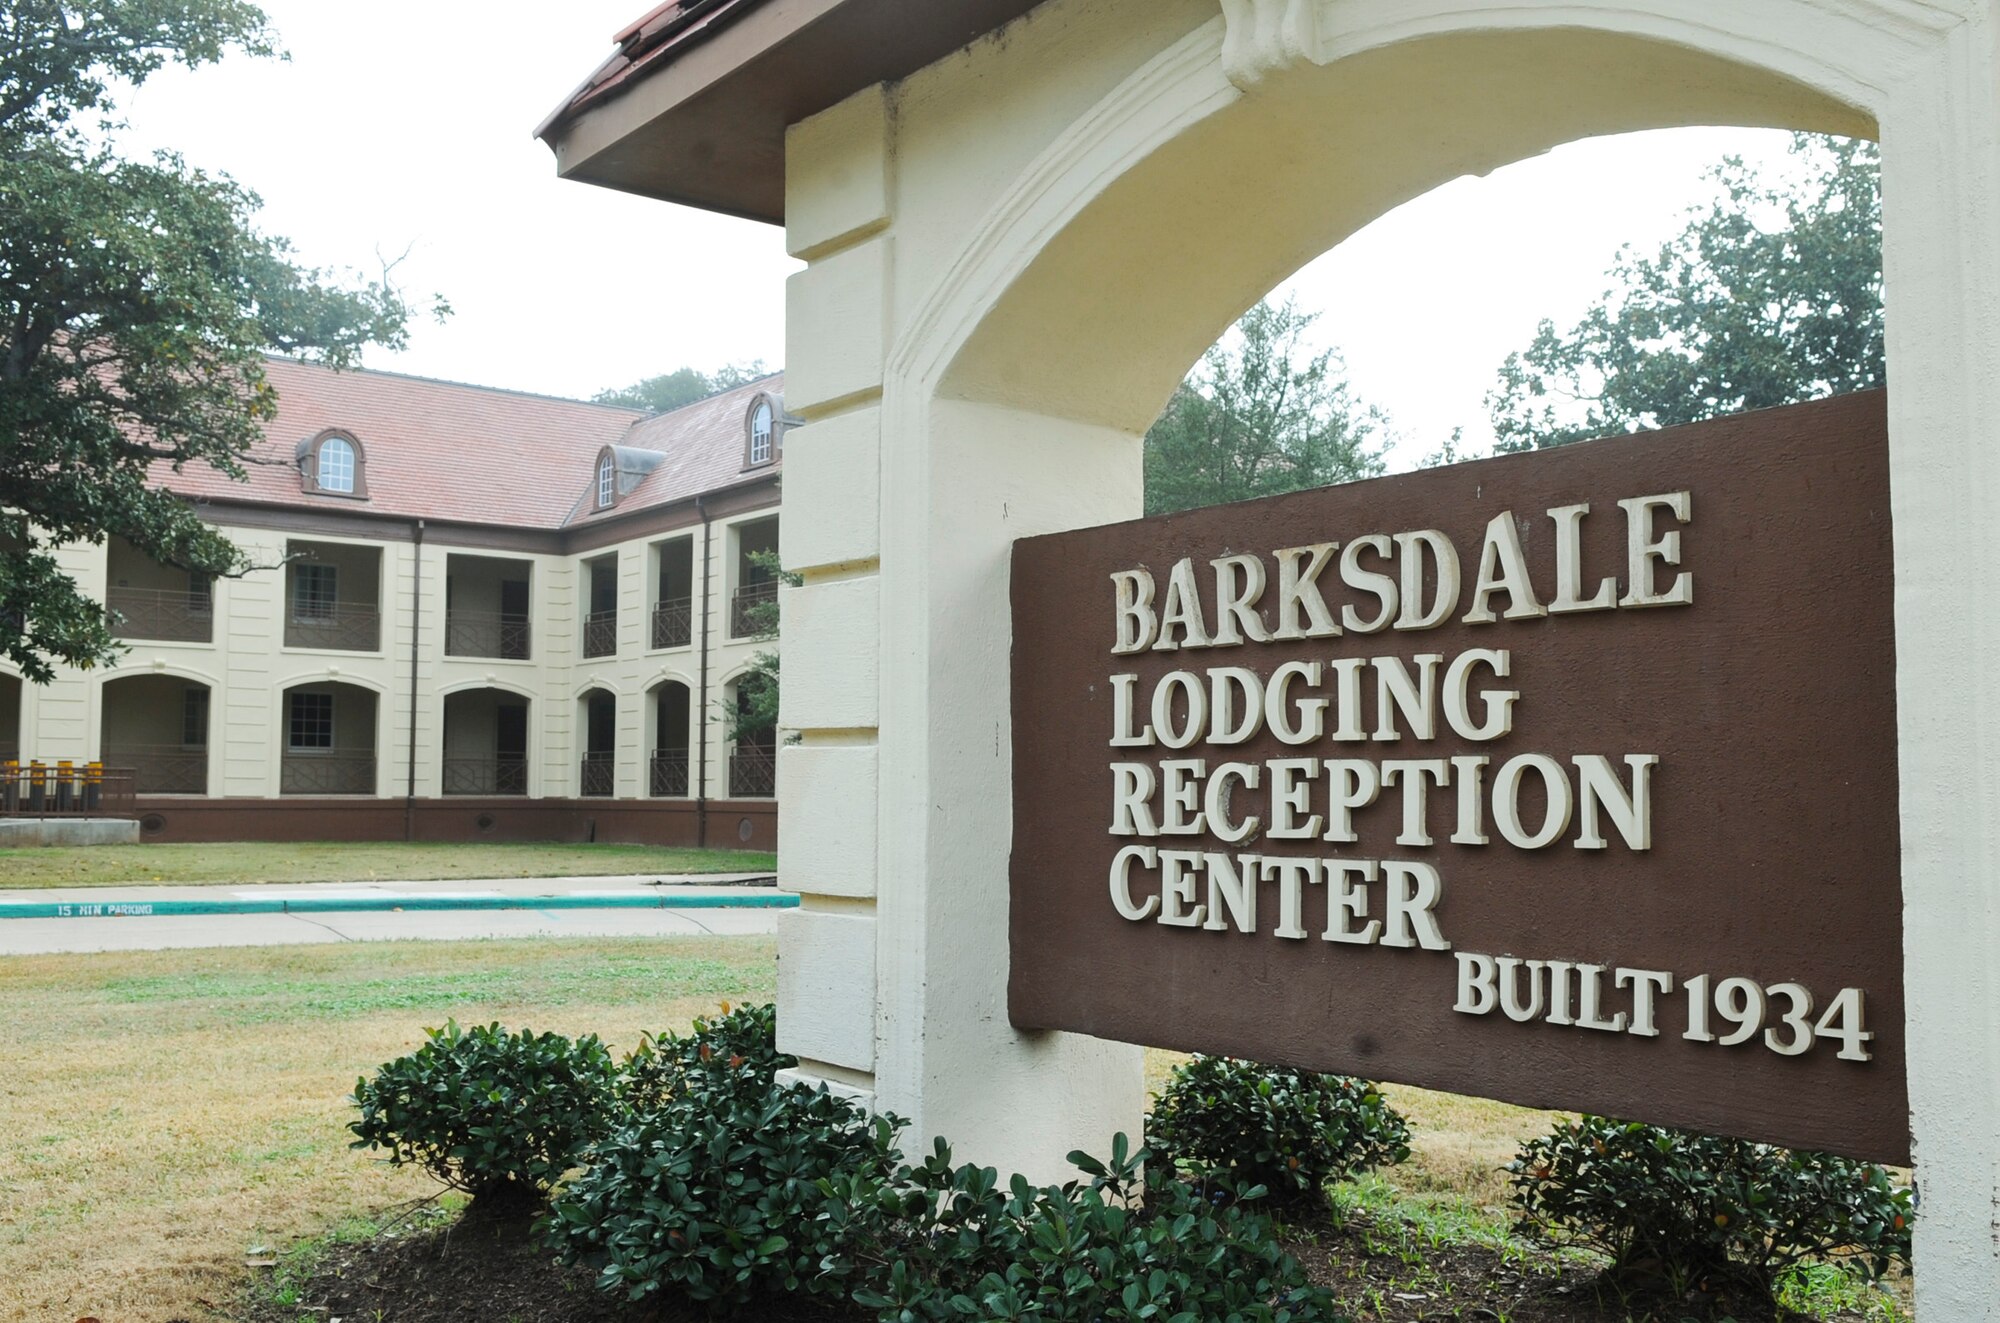 The historical Barksdale Lodging Inn was established in 1934 with only 26 rooms. Today, there are seven buildings with 189 rooms available for lodging needs. (U.S. Air Force photo/Senior Airman Kristin High)